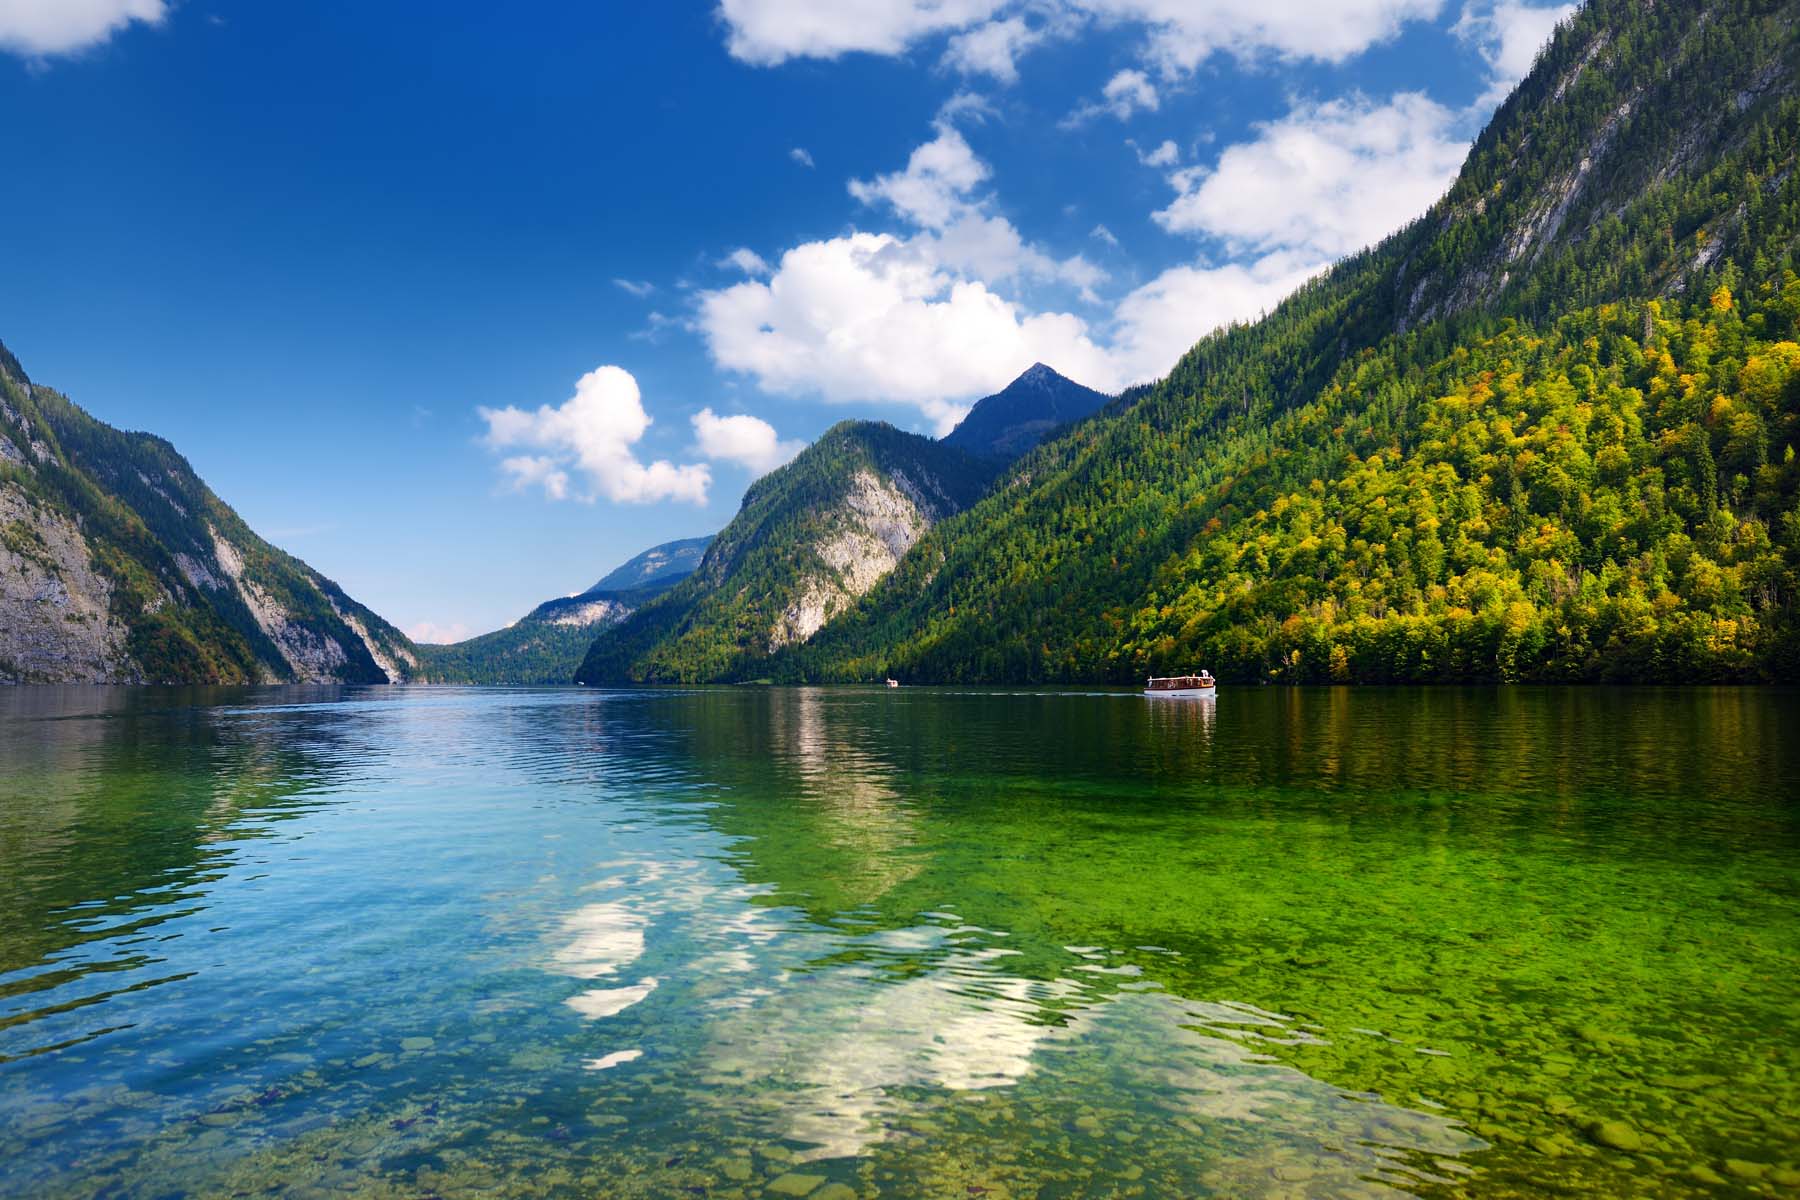 Stunning deep green waters of Konigssee, known as Germany's deepest and cleanest lake, located in the extreme southeast Berchtesgadener Land district of Bavaria, near the Austrian border.